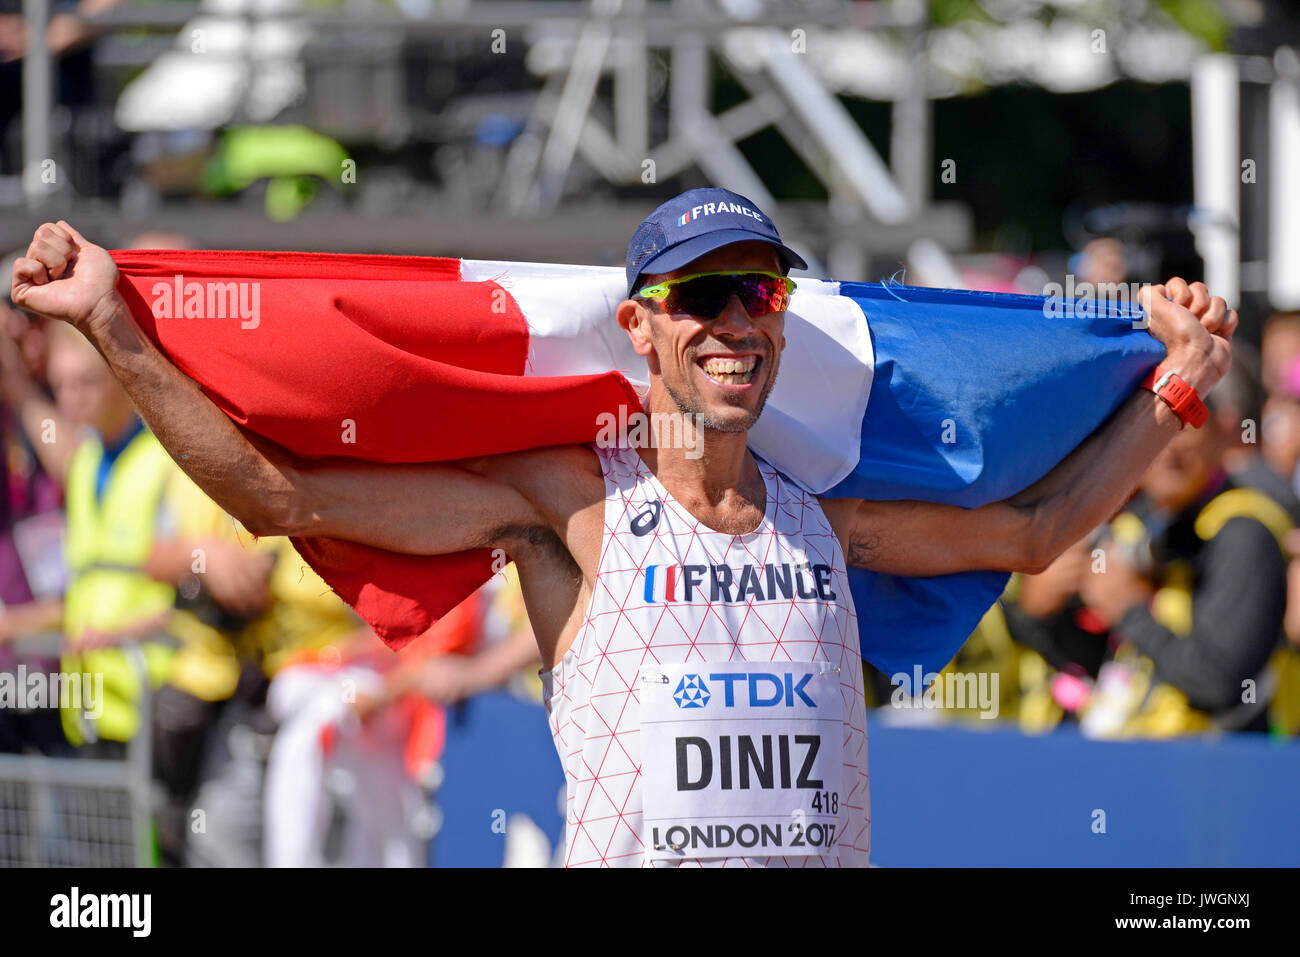 Yohann Diniz of France celebrating winning gold in the IAAF World Athletics Championships 50k walk in The Mall, London. French flag Stock Photo